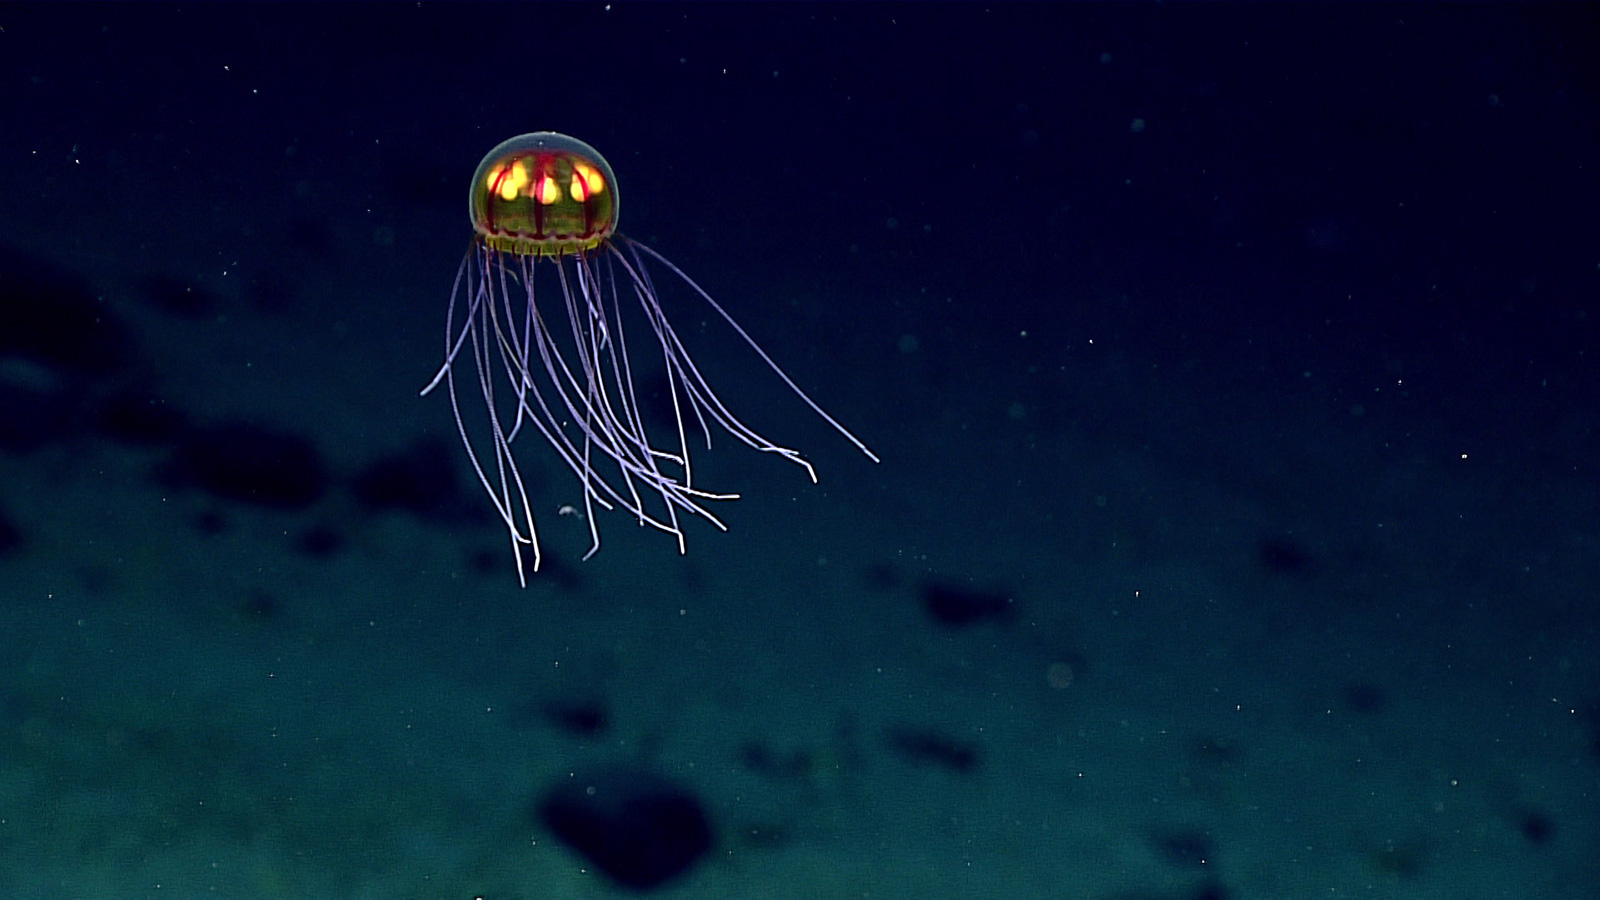 A bioluminescent jellyfish is shown in an image taken during exploration of the Marianas Trench Marine National Monument area in the Pacific Ocean near Guam and Saipan, on April 24, 2016. The expedition dives ranged from 820 feet to 3.7 miles (250 meters to 6,000 meters) deep. 